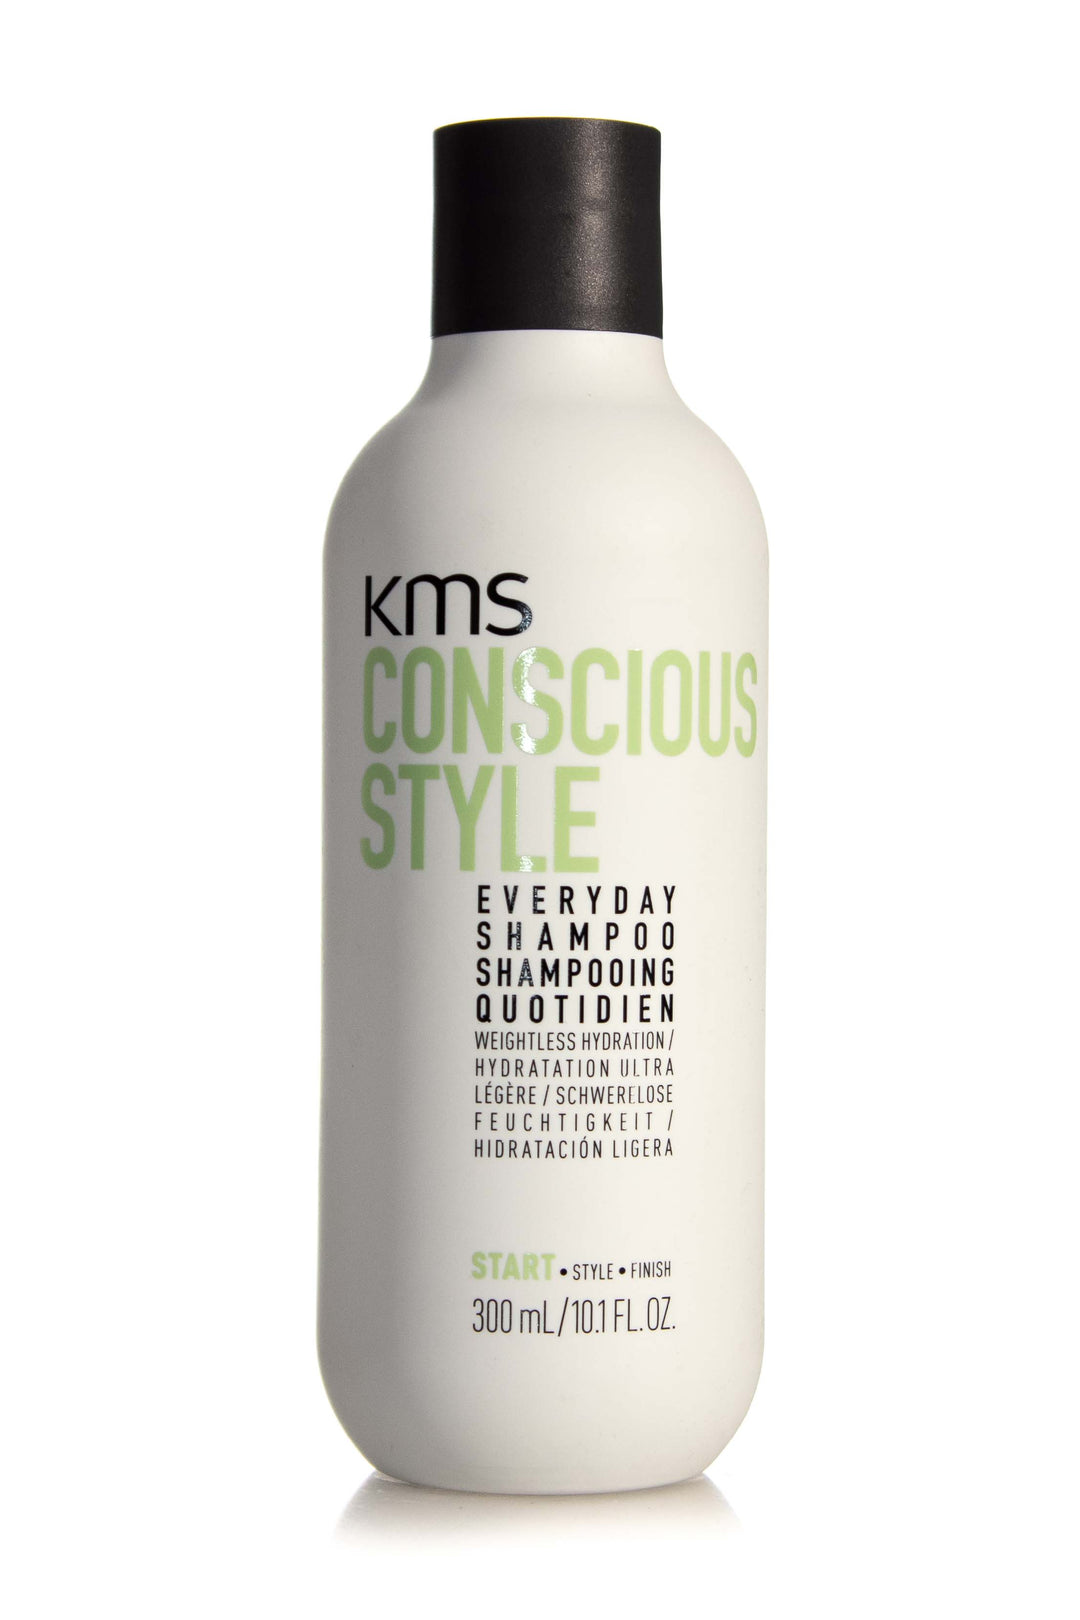 KMS Conscious Style Every Day Shampoo